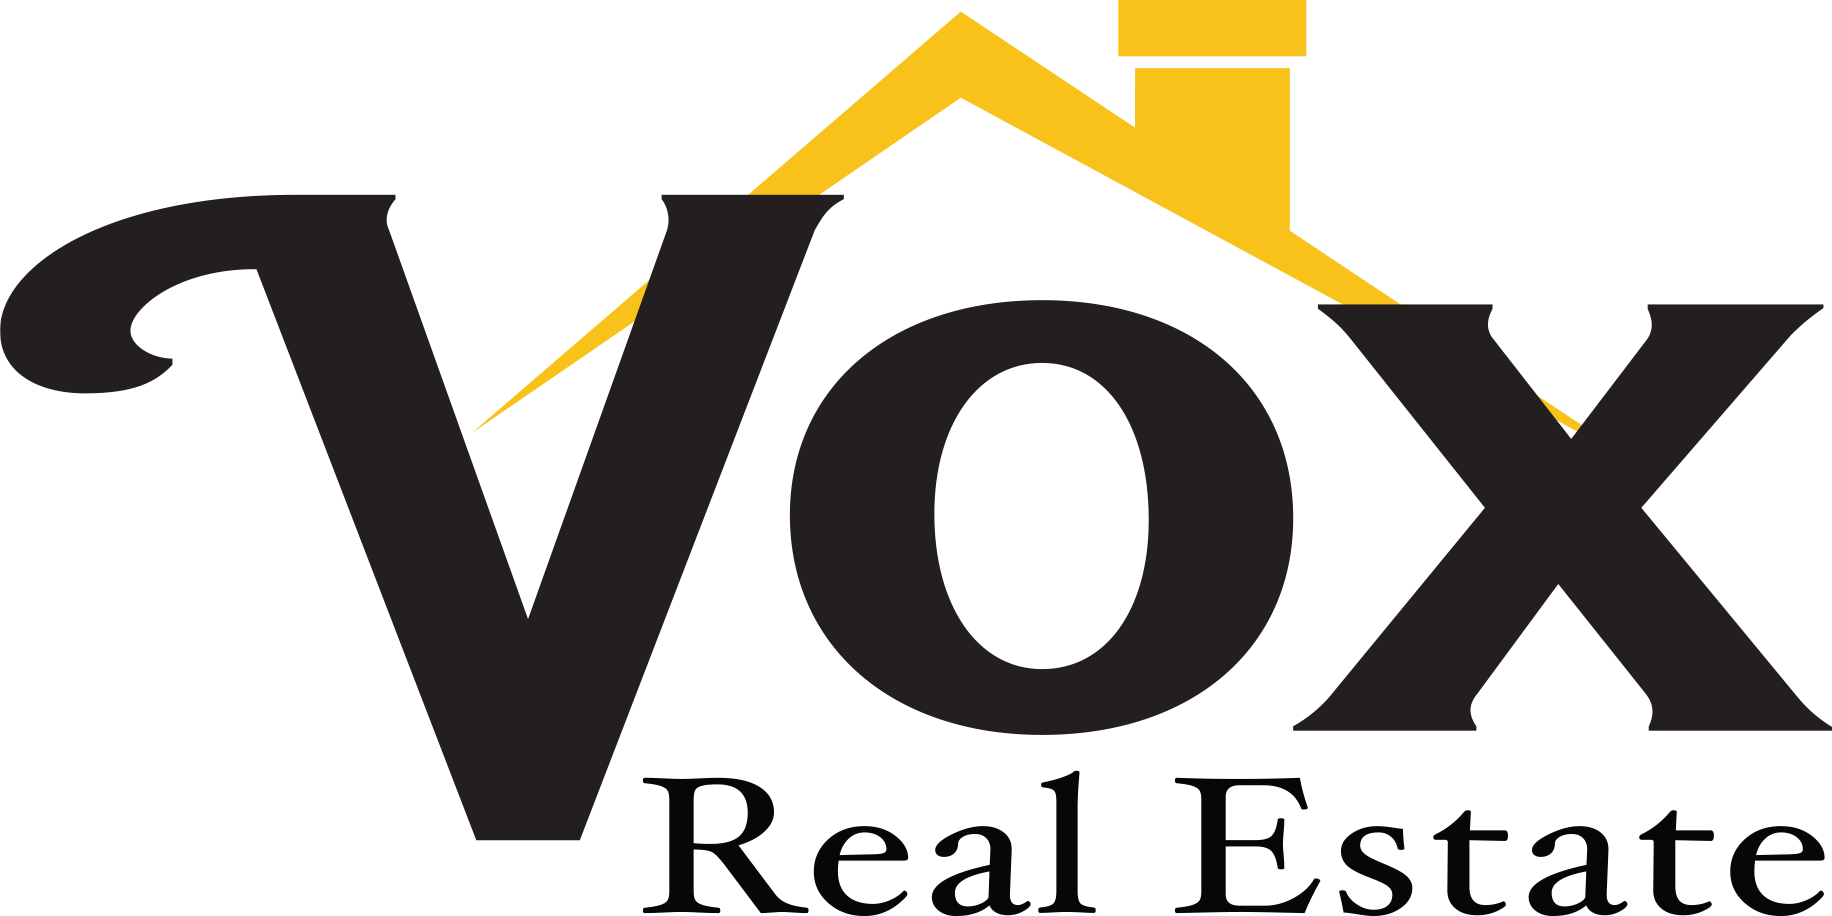 VoxRealty